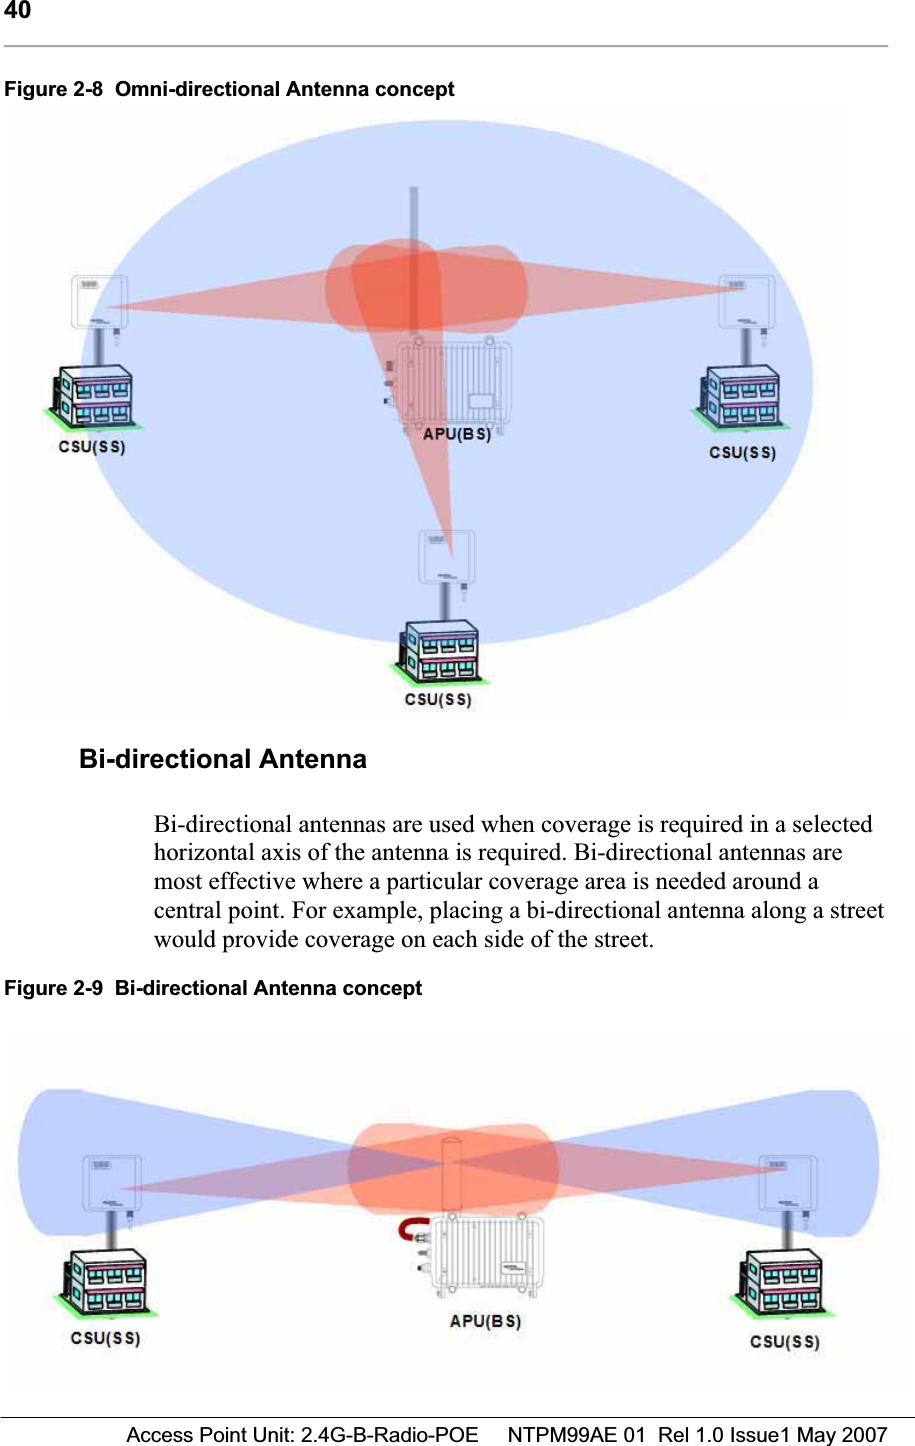 40 Access Point Unit: 2.4G-B-Radio-POE     NTPM99AE 01  Rel 1.0 Issue1 May 2007Figure 2-8  Omni-directional Antenna concept Bi-directional Antenna  Bi-directional antennas are used when coverage is required in a selected horizontal axis of the antenna is required. Bi-directional antennas are most effective where a particular coverage area is needed around a central point. For example, placing a bi-directional antenna along a street would provide coverage on each side of the street.  Figure 2-9  Bi-directional Antenna concept 